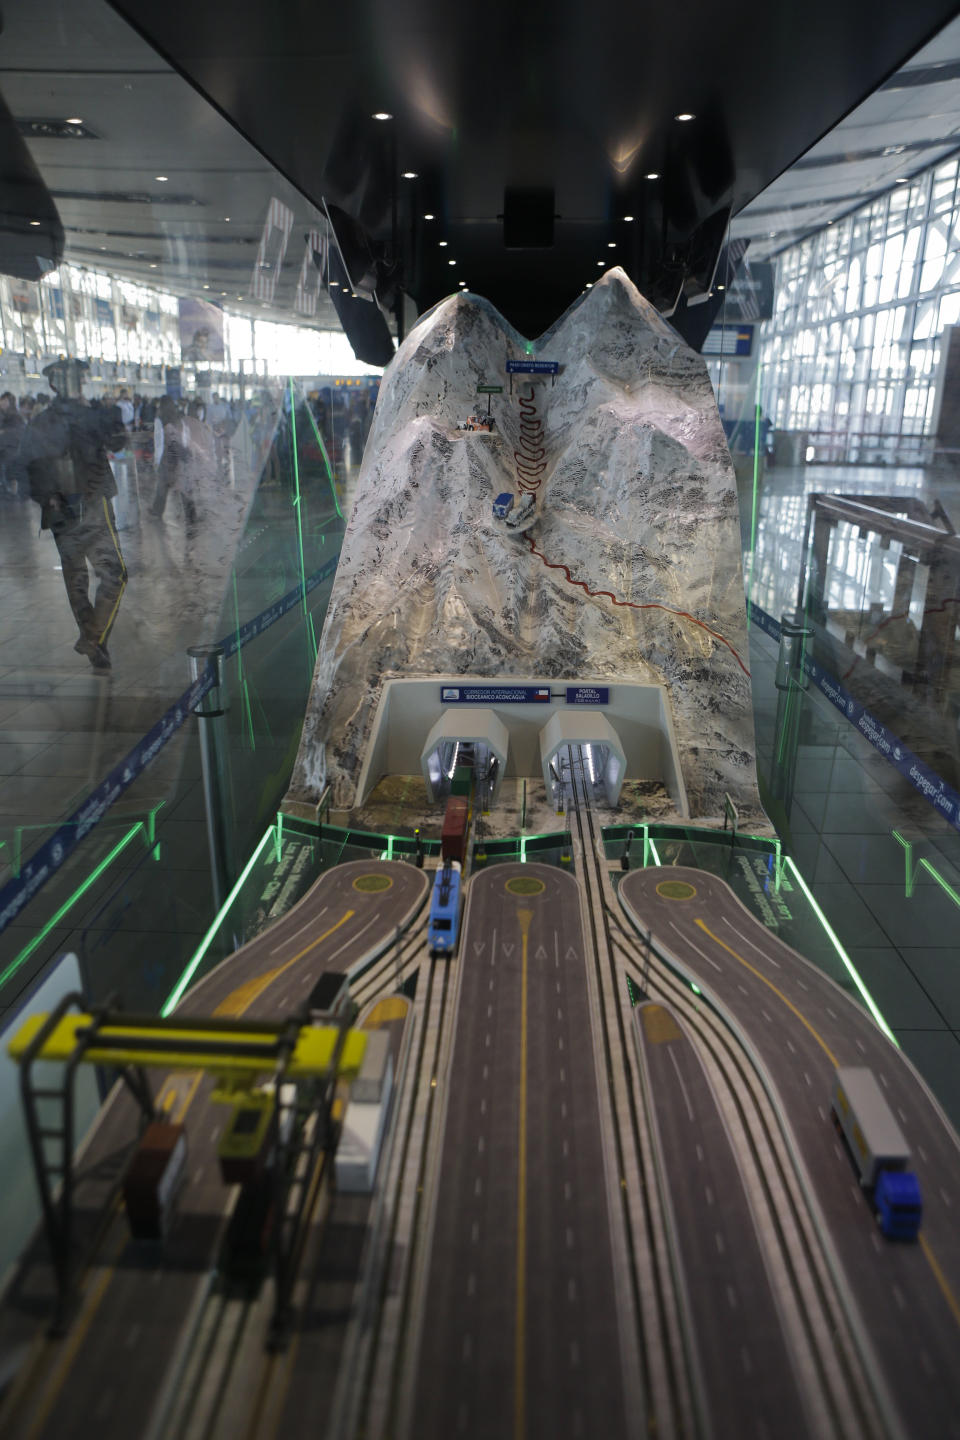 In this Sept. 12, 2012 photo taken through glass, a toy train emerges from a tunnel inside a miniature model of the proposed Aconcagua Bi-Oceanico Corridor, on display at the airport in Santiago, Chile. Two of South America's leading economies are neighbors but might as well be worlds apart, separated by a mountain wall with only one major land crossing that gets snowed in for up to two months every winter. An ambitious effort to build a private railway under Andean peaks aims to end the bottleneck. (AP Photo/Eduardo Di Baia)